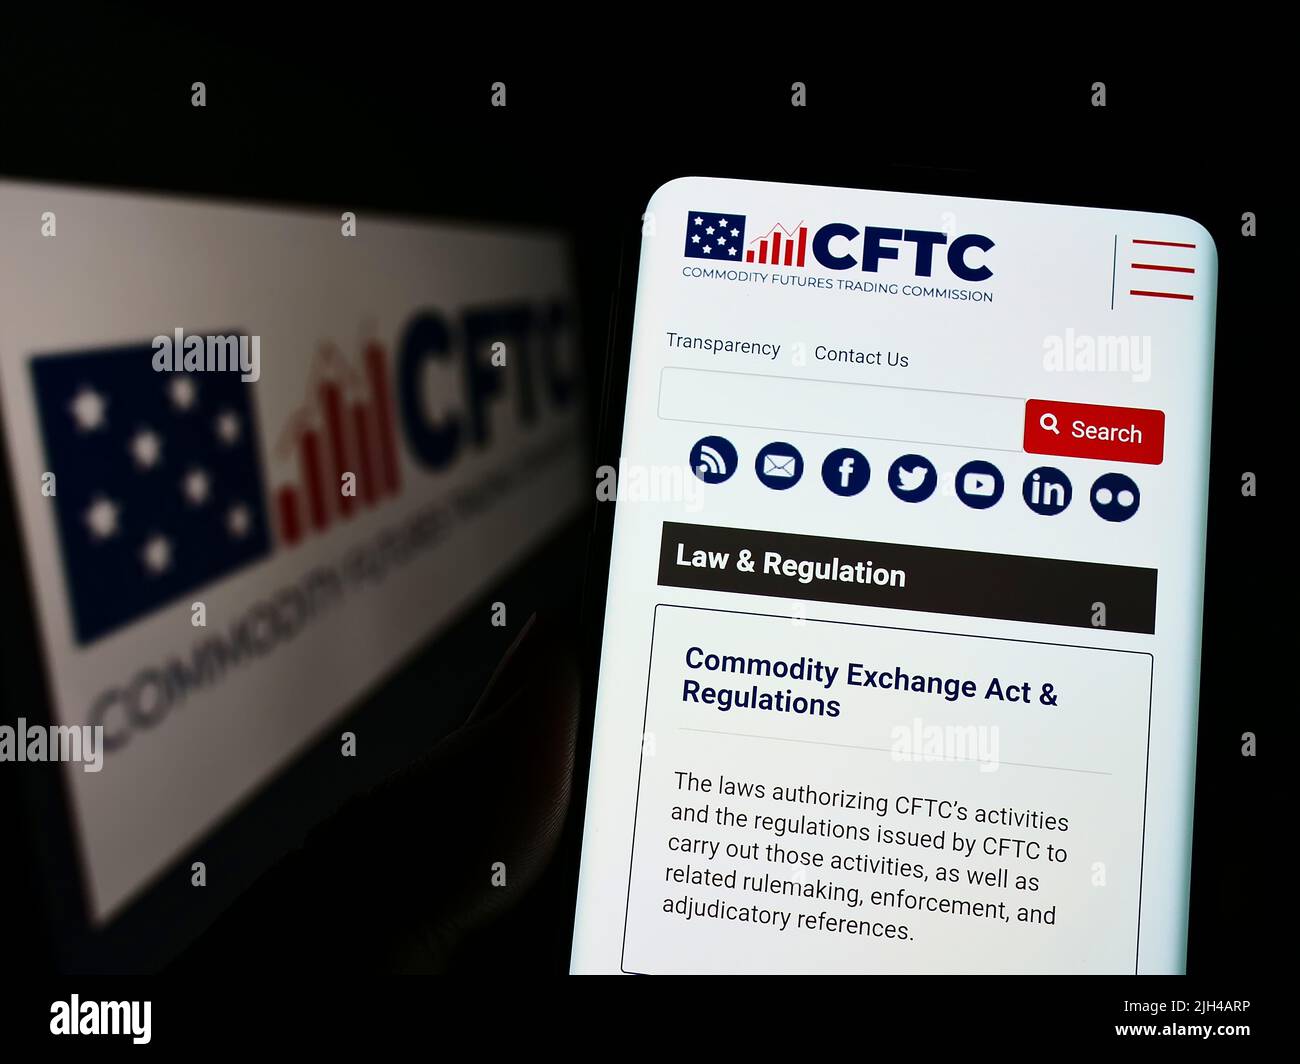 Person holding cellphone with webpage of US Commodity Futures Trading Commission (CFTC) on screen with logo. Focus on center of phone display. Stock Photo